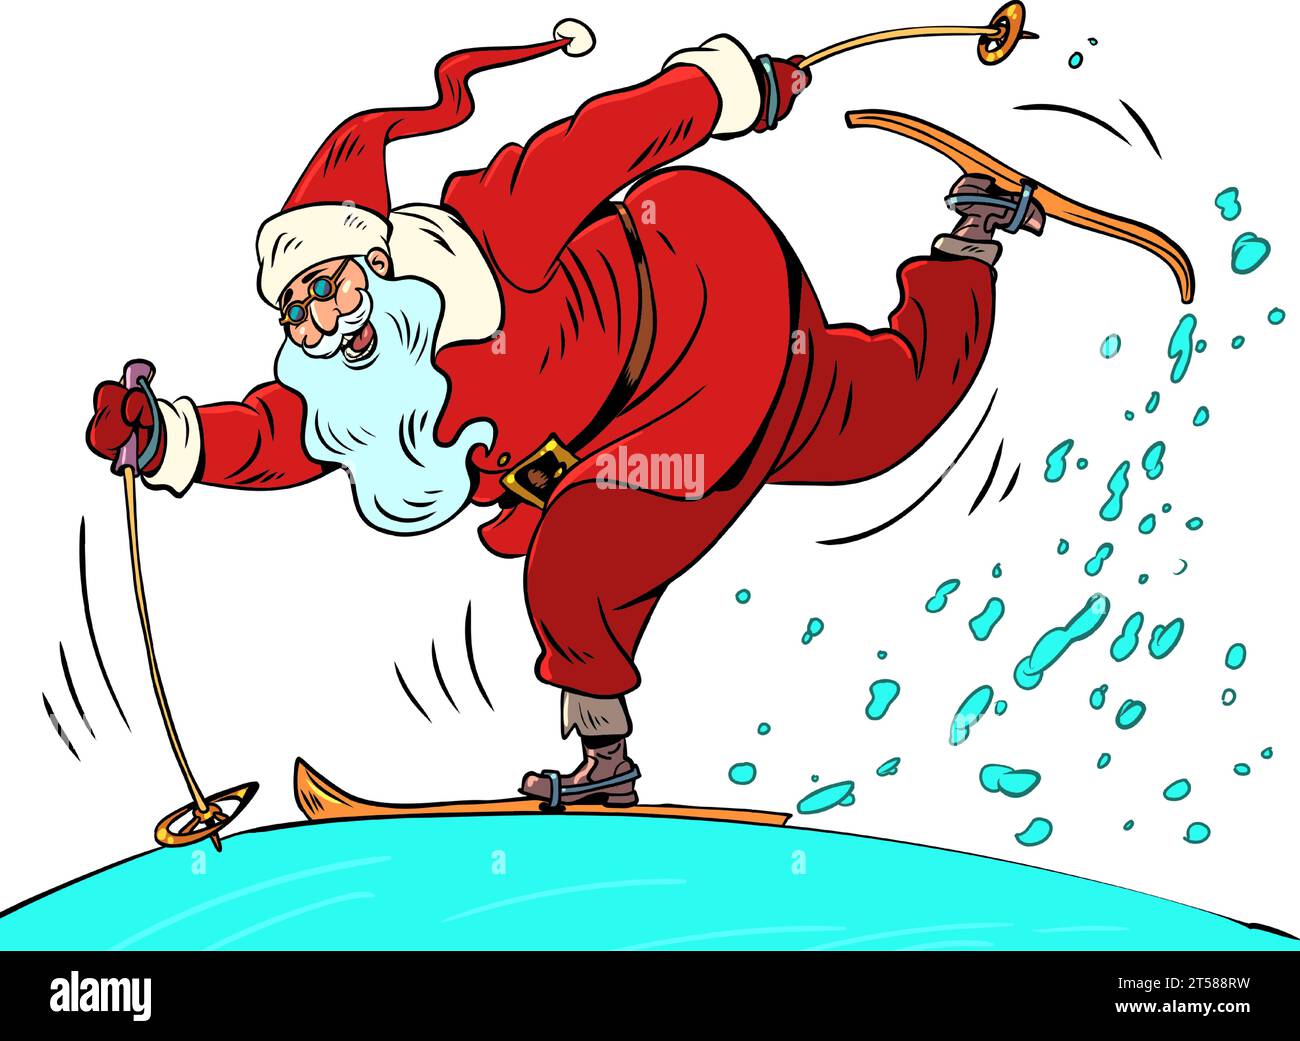 The approach of the new year. Equipment for skiing and snowboarding. Santa Claus is skiing in the snow. Comic cartoon pop art retro vector illustratio Stock Vector